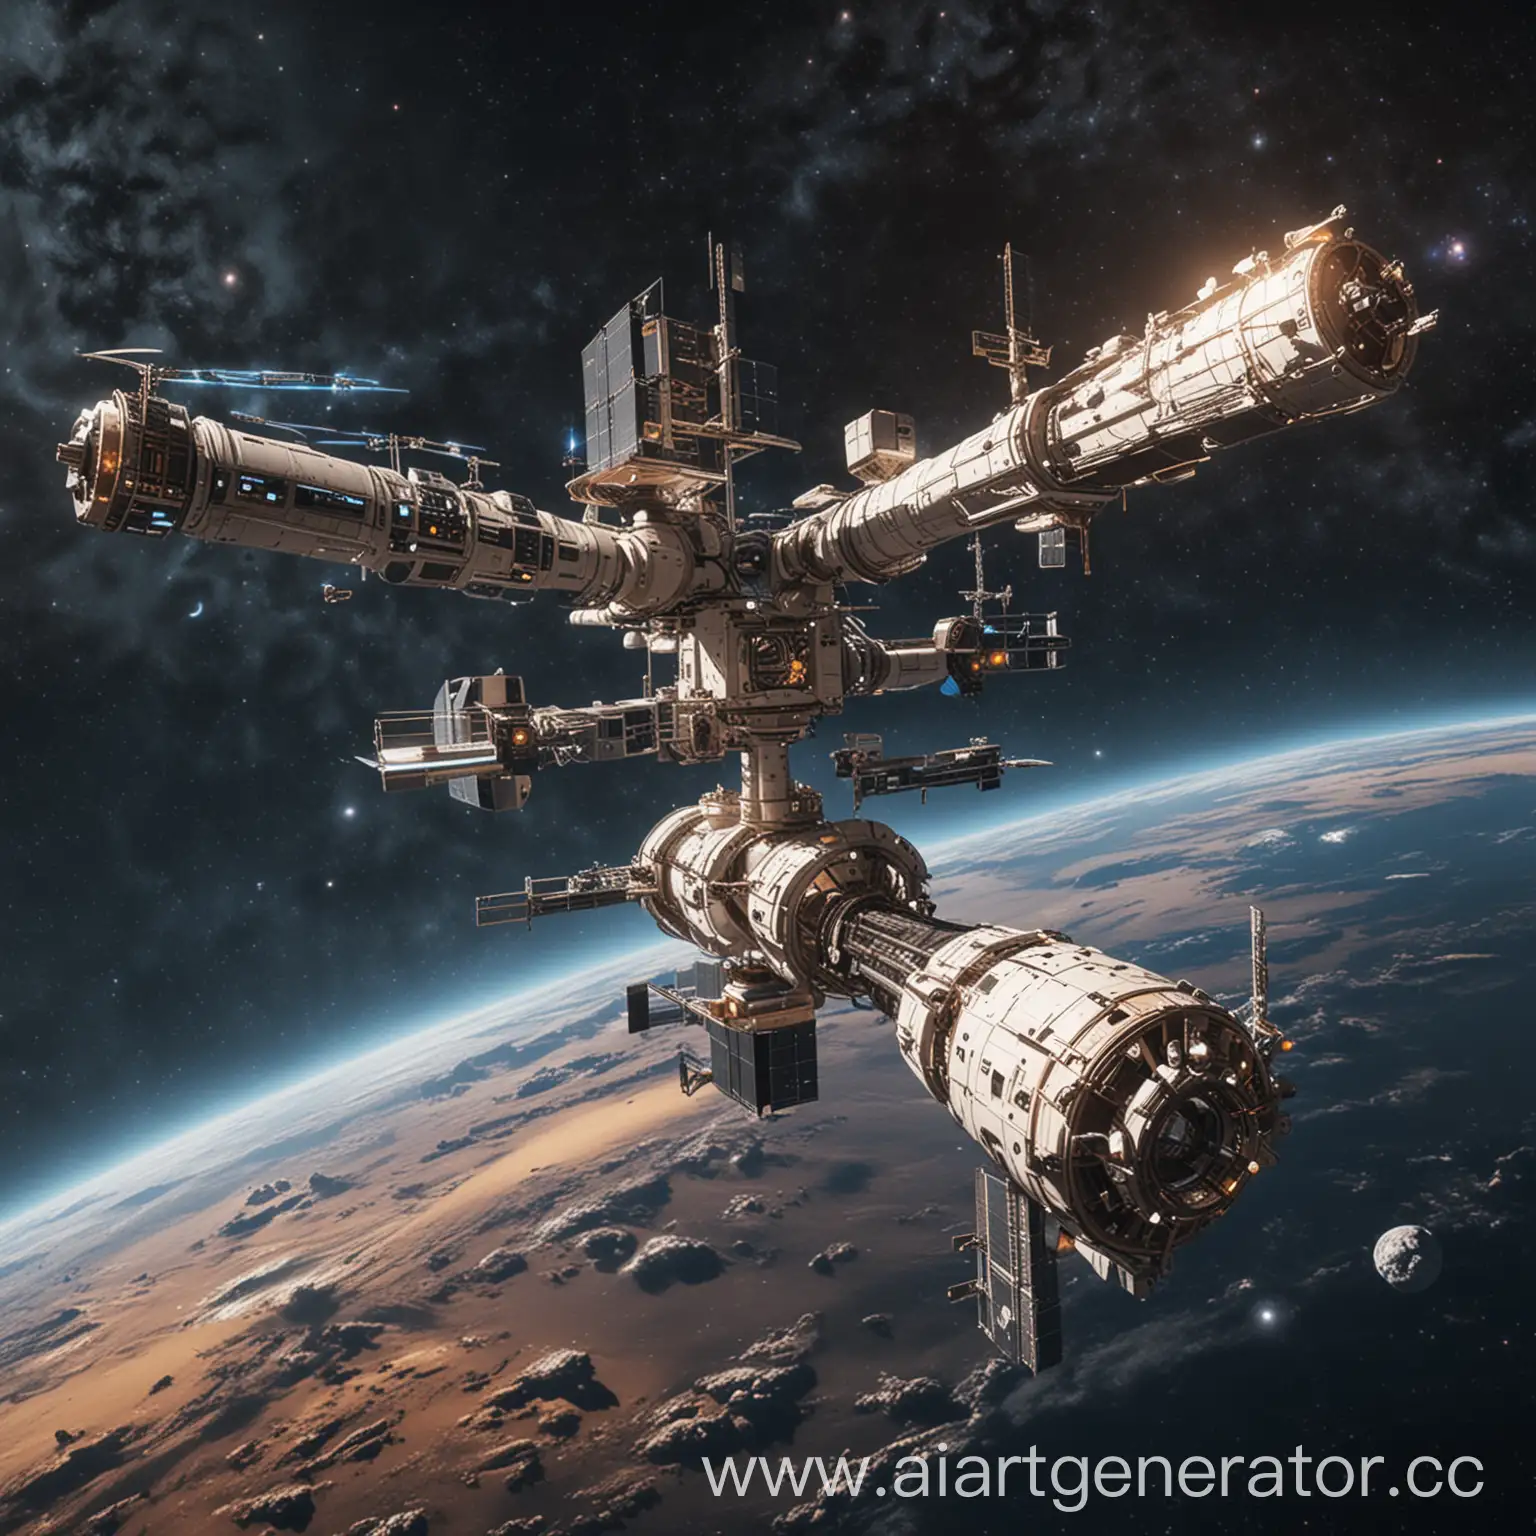 Futuristic-Orbital-Station-with-Advanced-Artificial-Intelligence